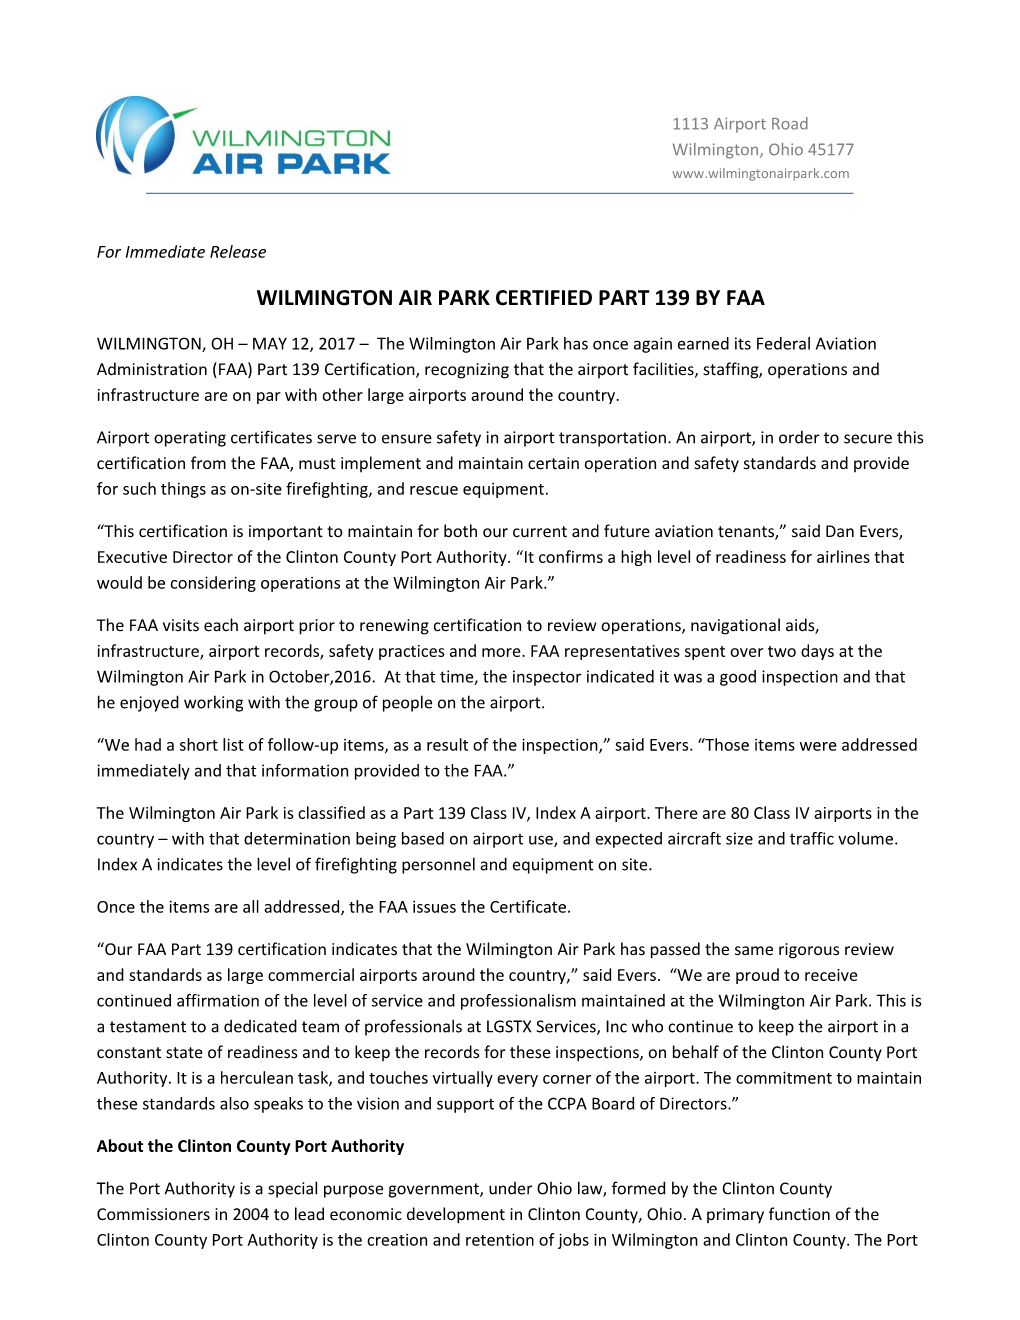 Wilmington Air Park Certified Part 139 by Faa